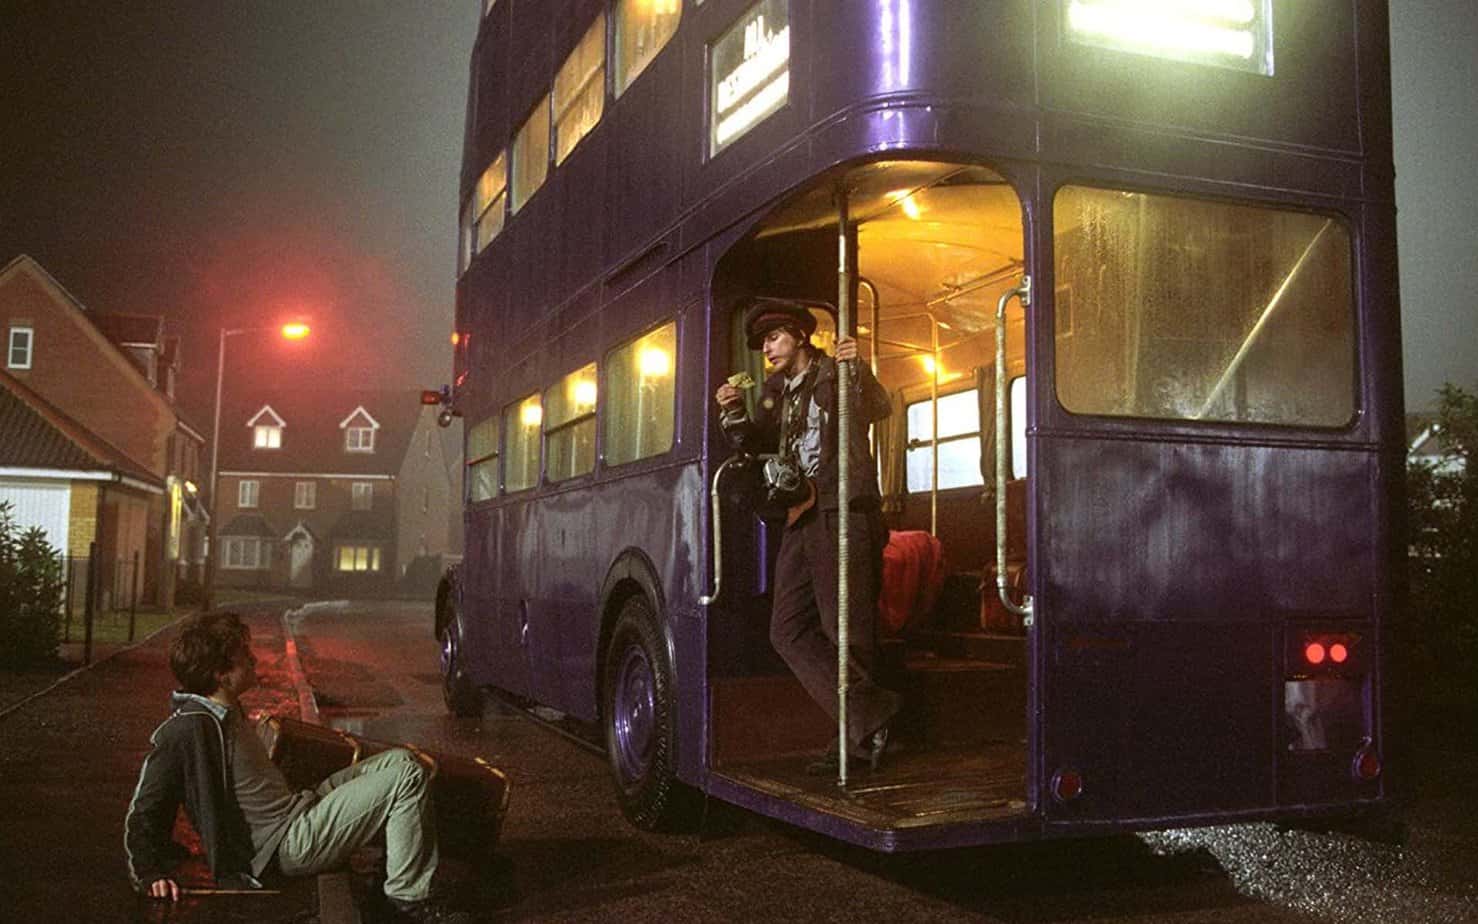 Harry Potter Buses are Transporting Medical Workers - Magical rides for magical people